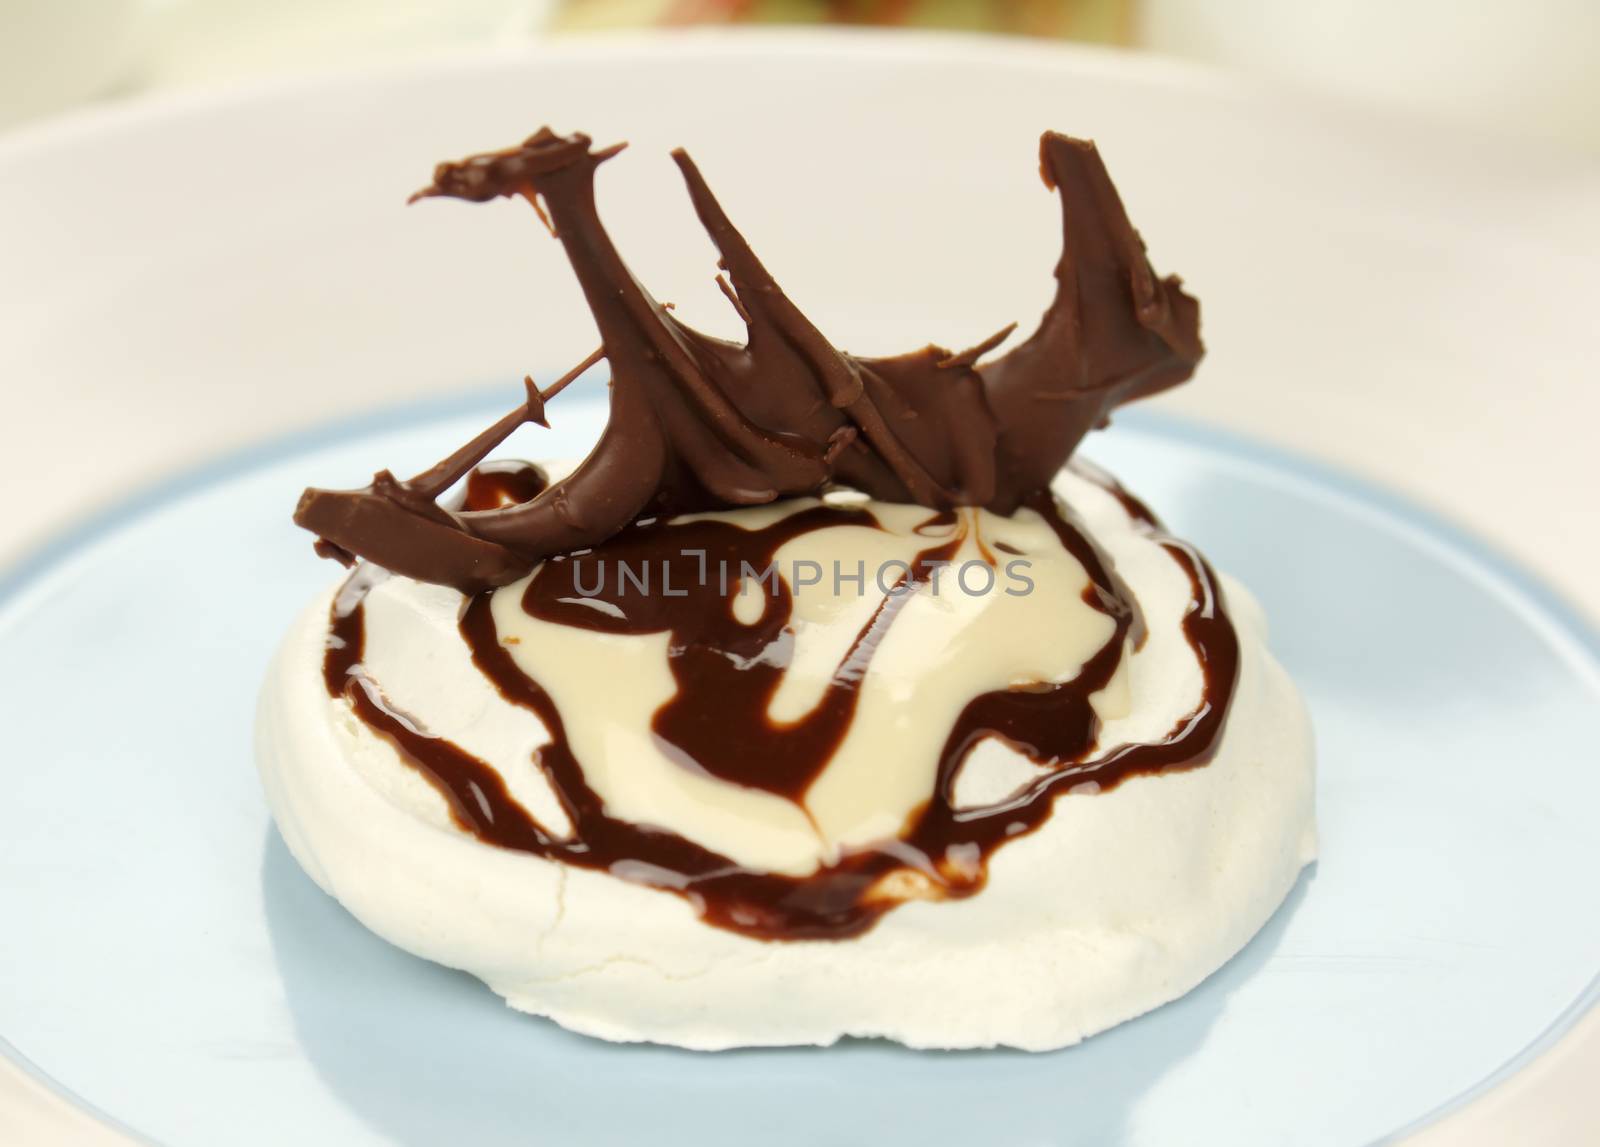 A fresh baked meringue with a chocolate sculpture sitting on top.